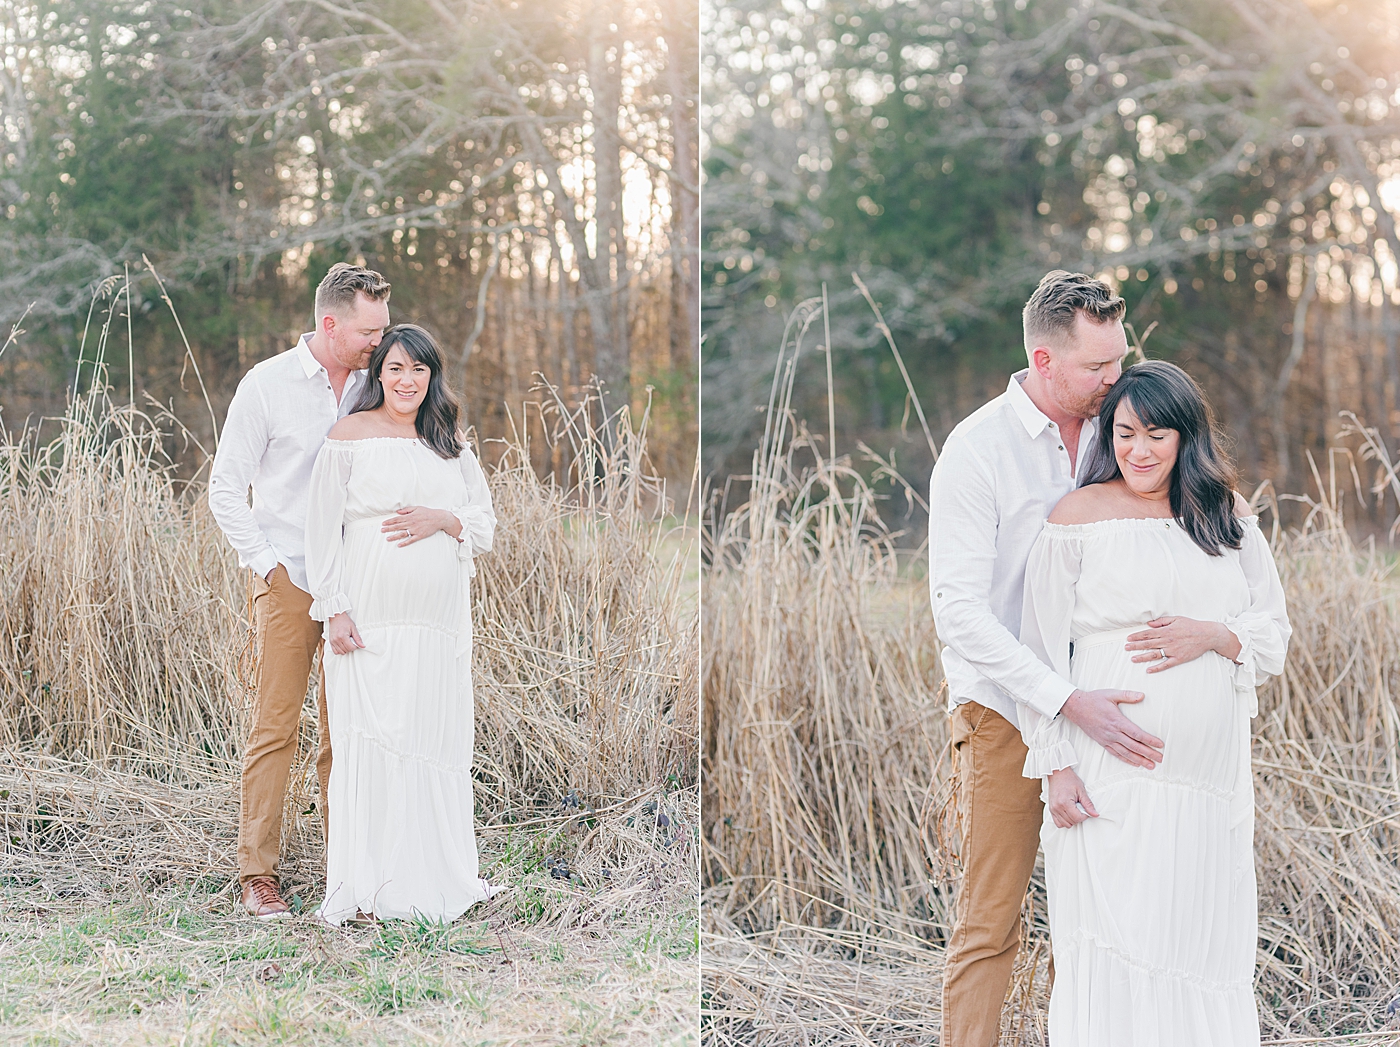 Mom and dad in white snuggling during photo session at fisher farm park | Photo by Anna Wisjo Photography